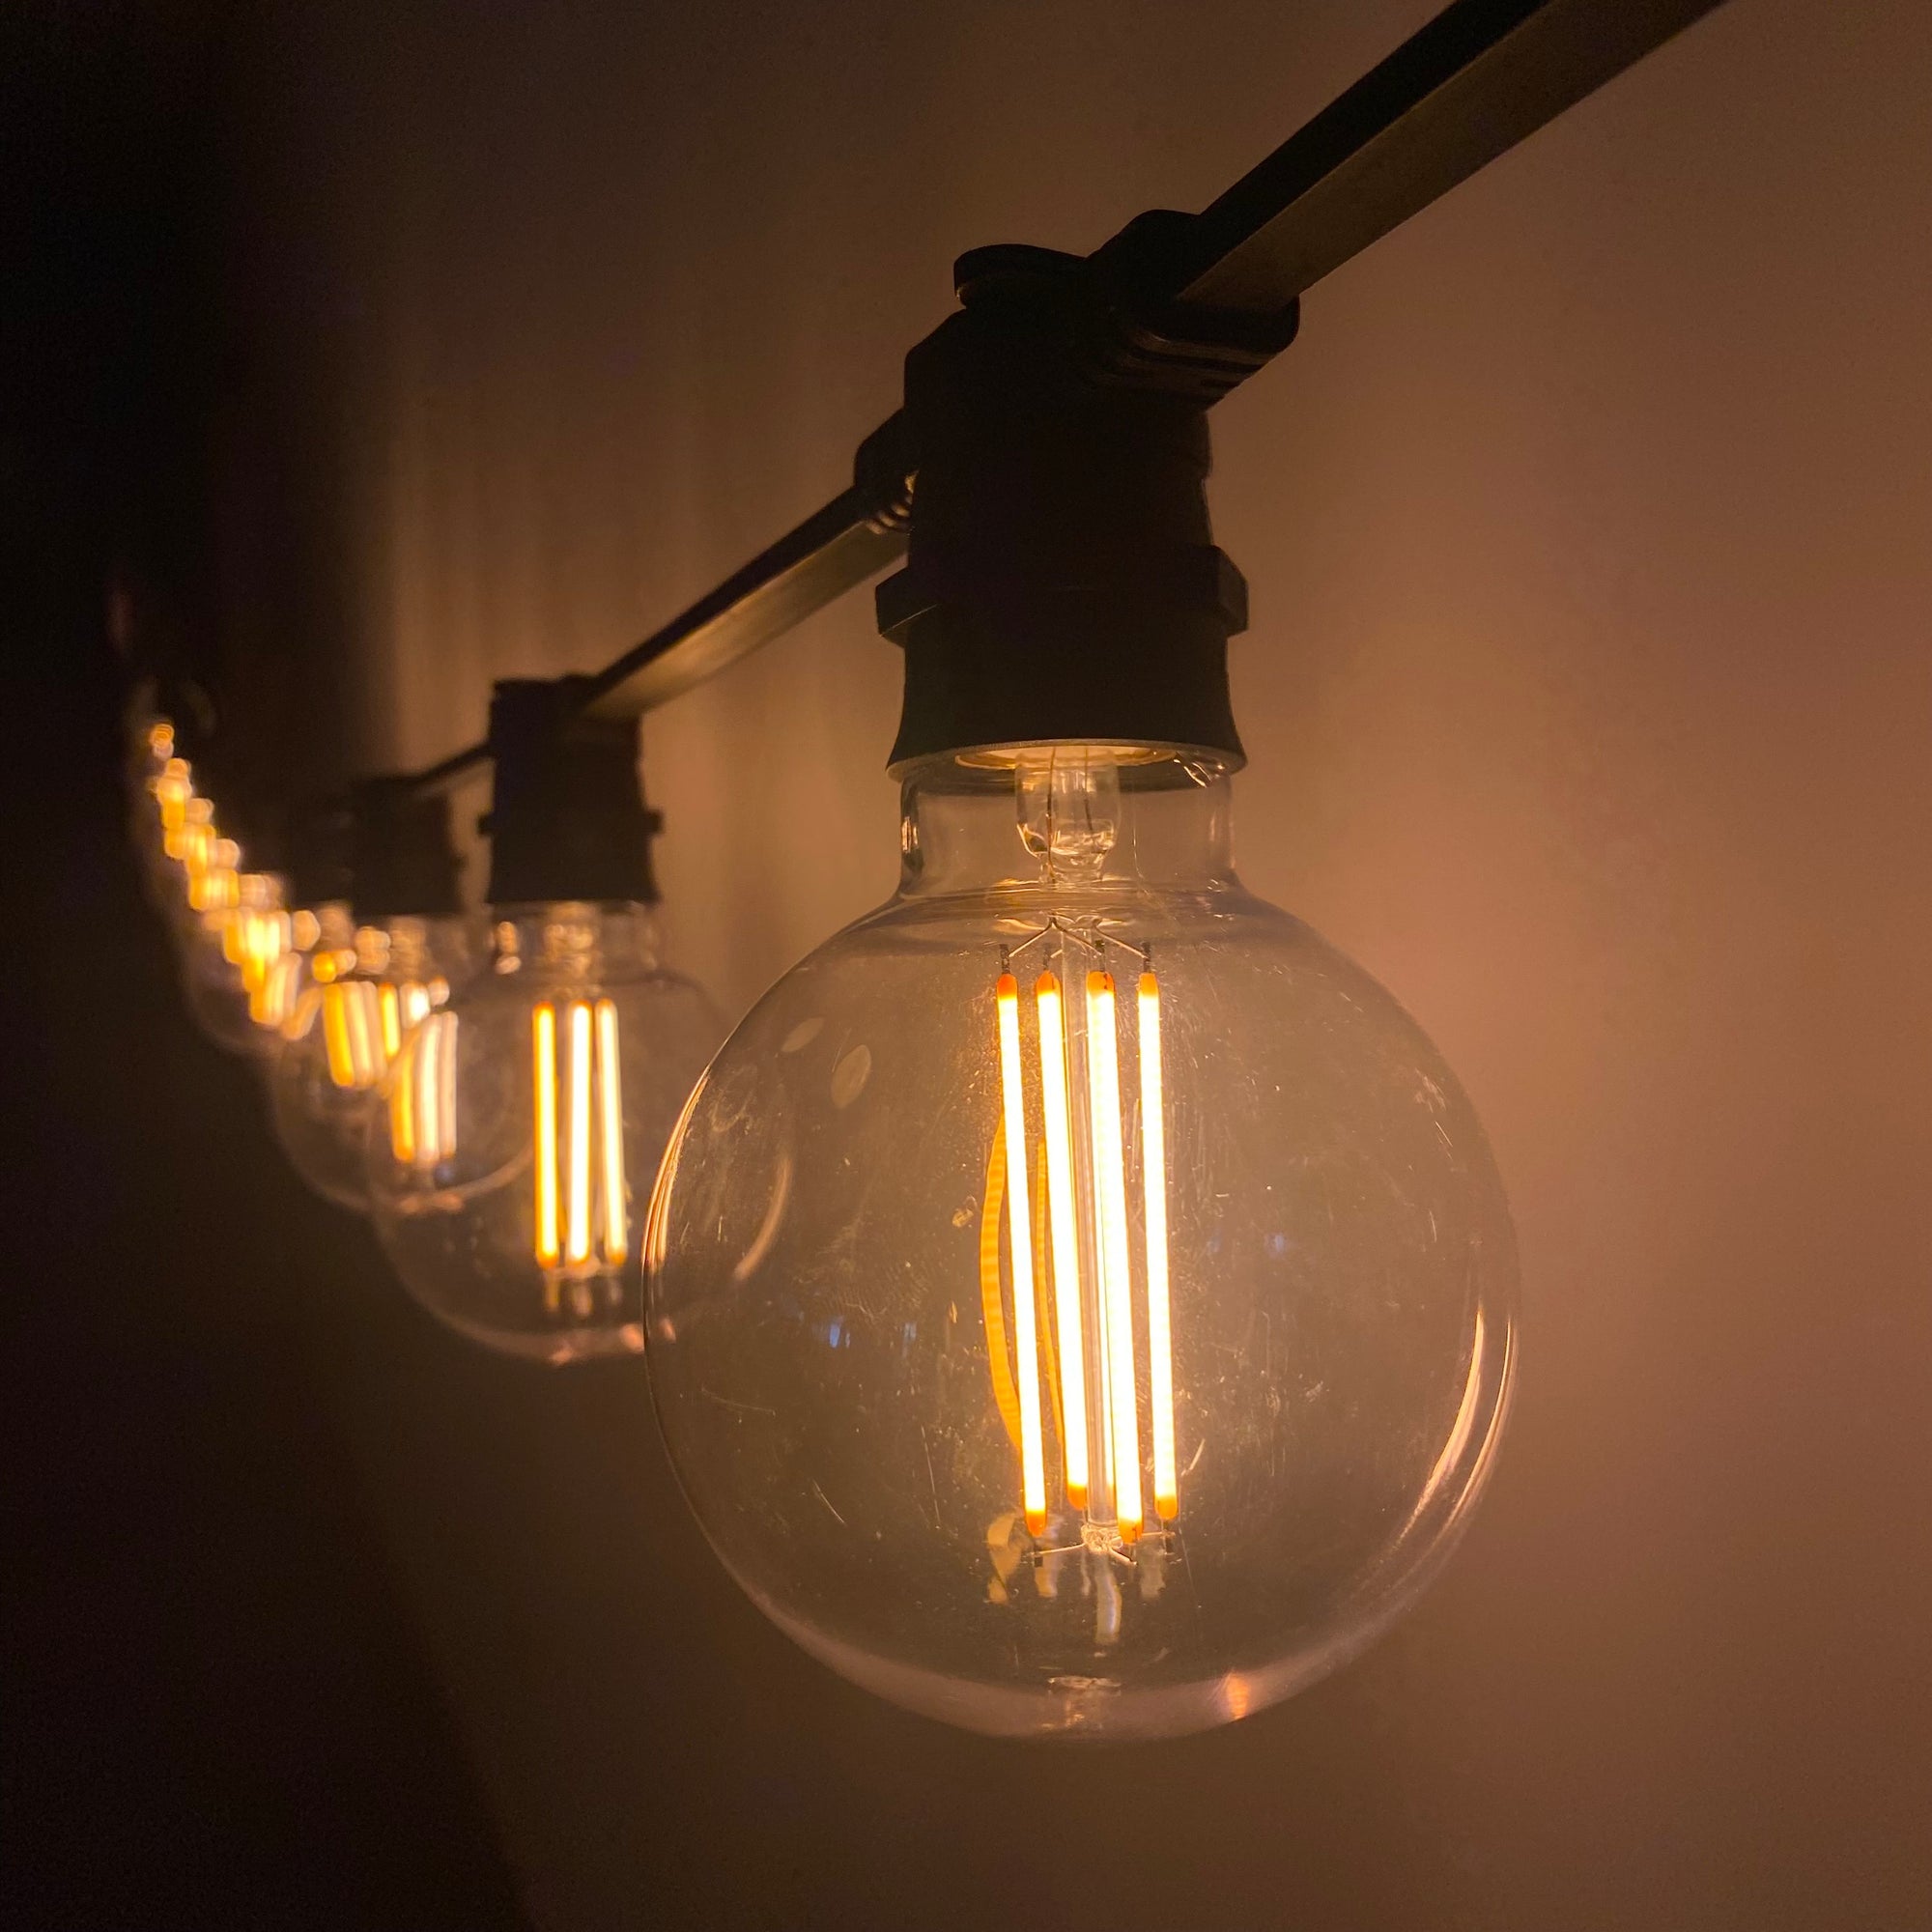 How to Choose the Right Festoon Lighting for Your Business